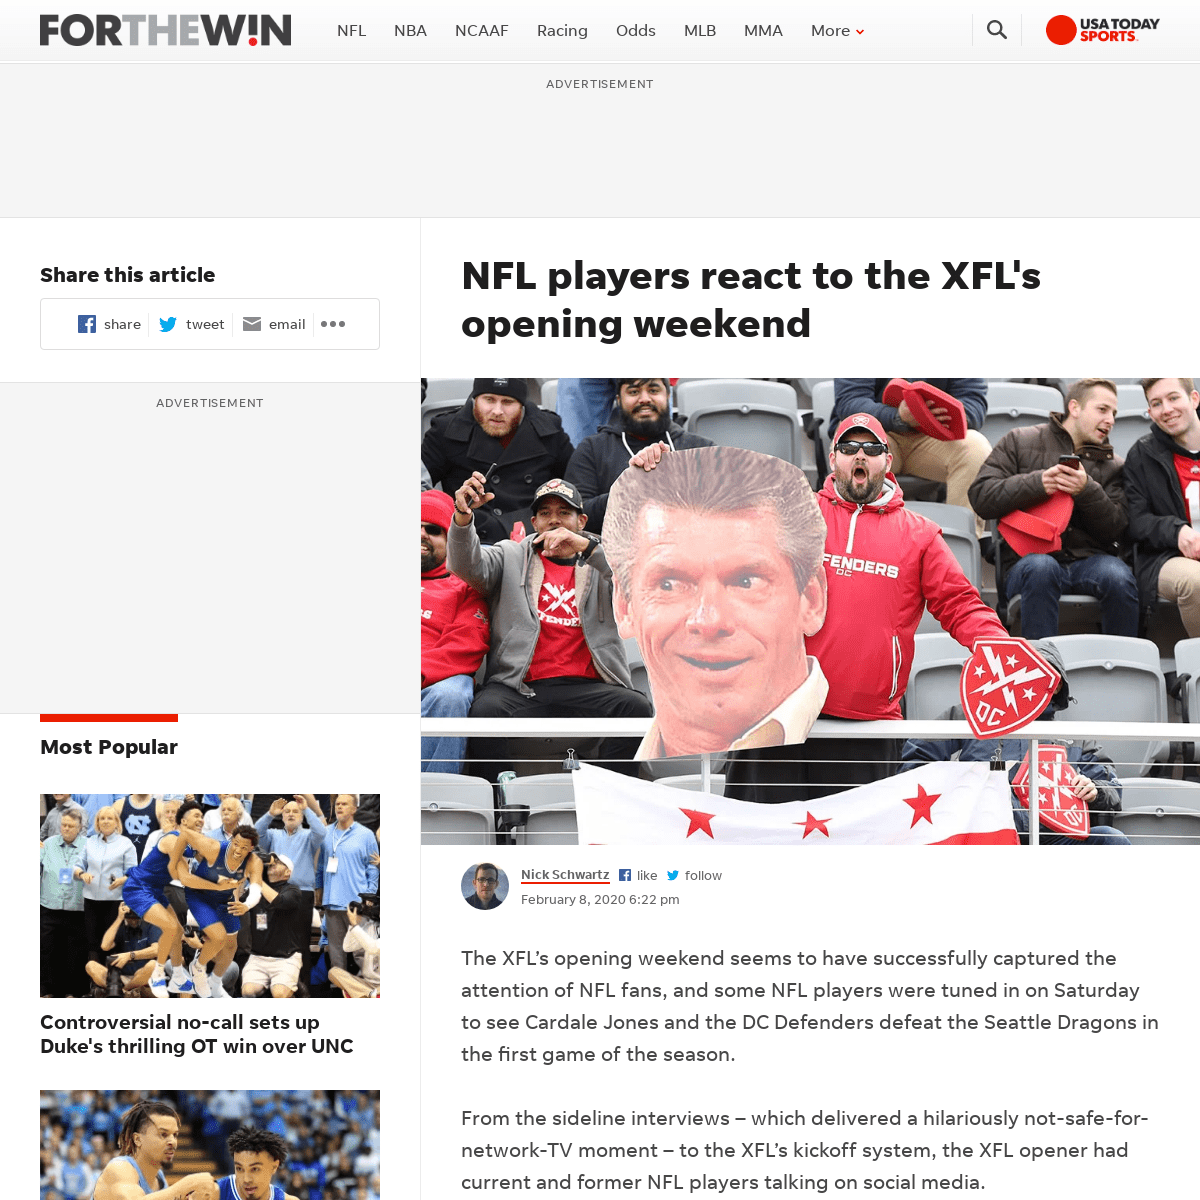 A complete backup of ftw.usatoday.com/2020/02/nfl-players-react-to-xfl